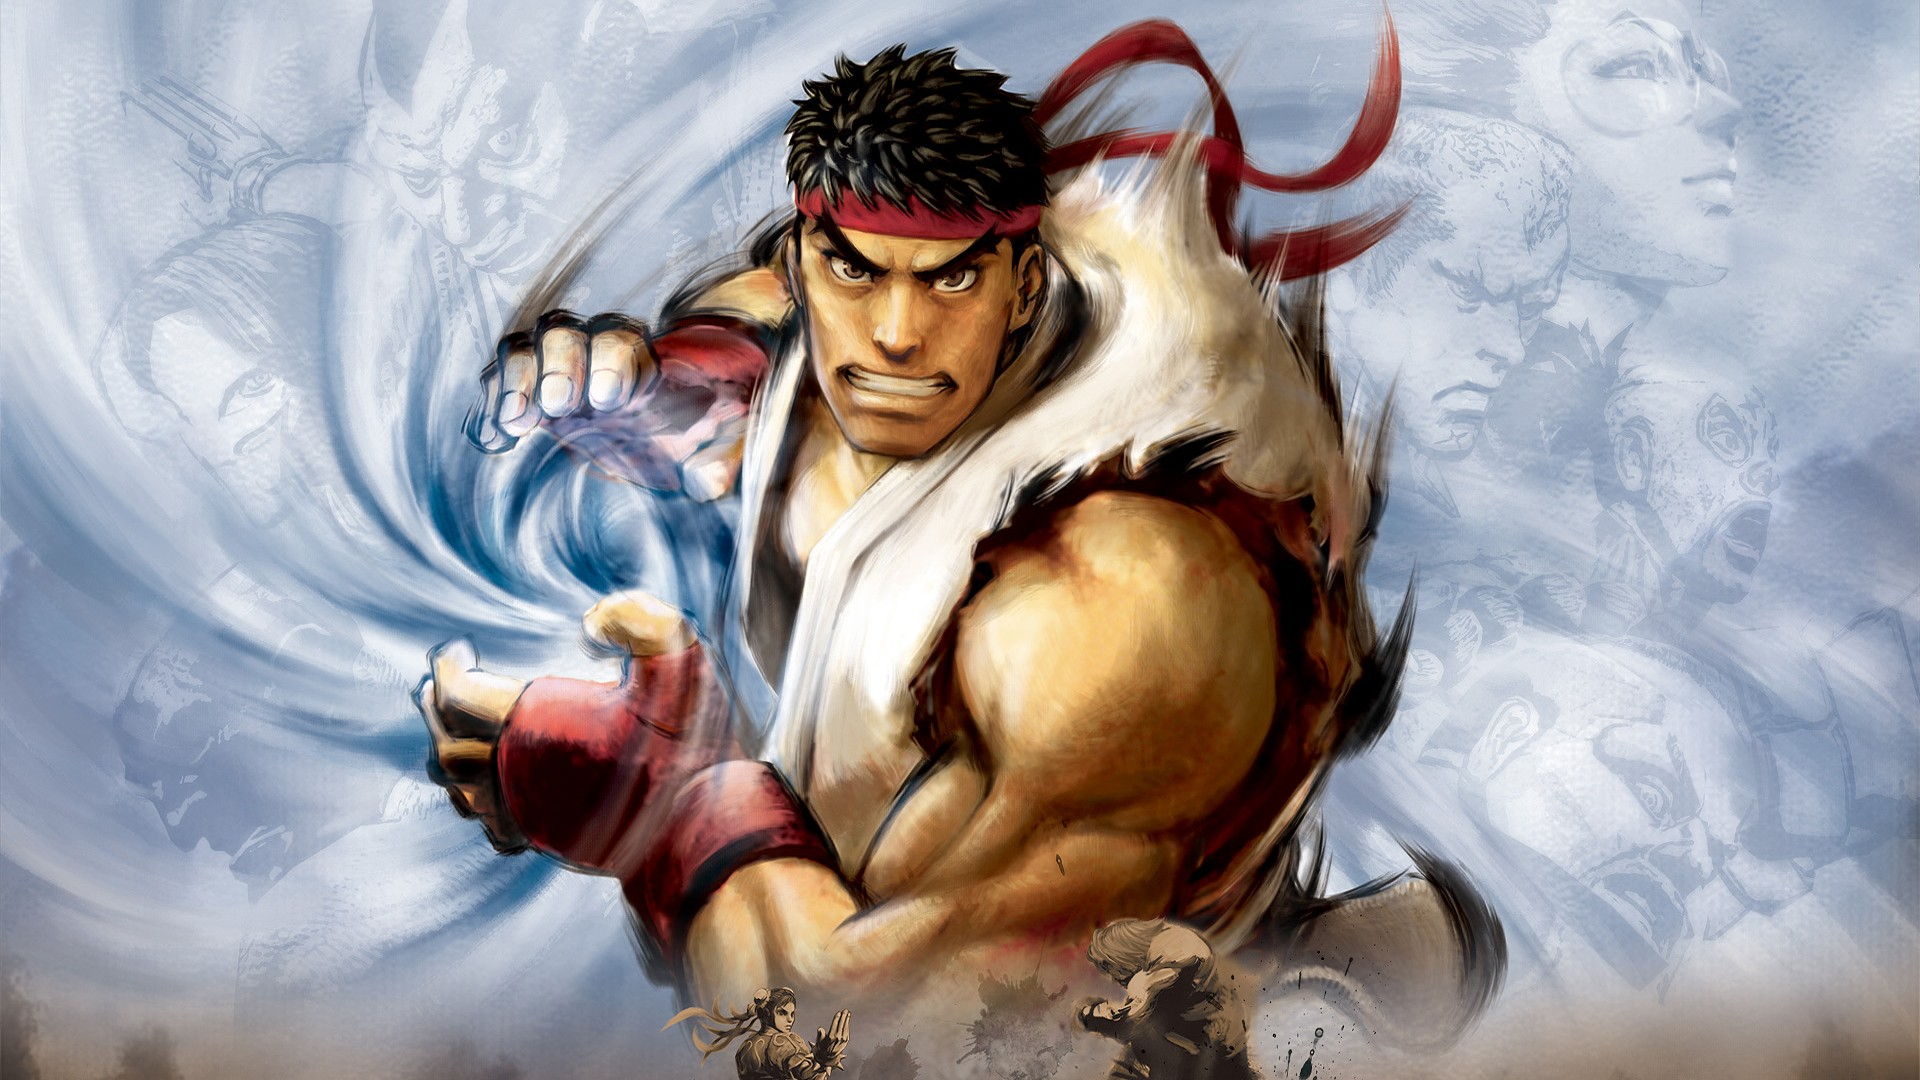 1920x1080 Super Street Fighter IV: Arcade Edition HD Wallpapers and Backgrounds